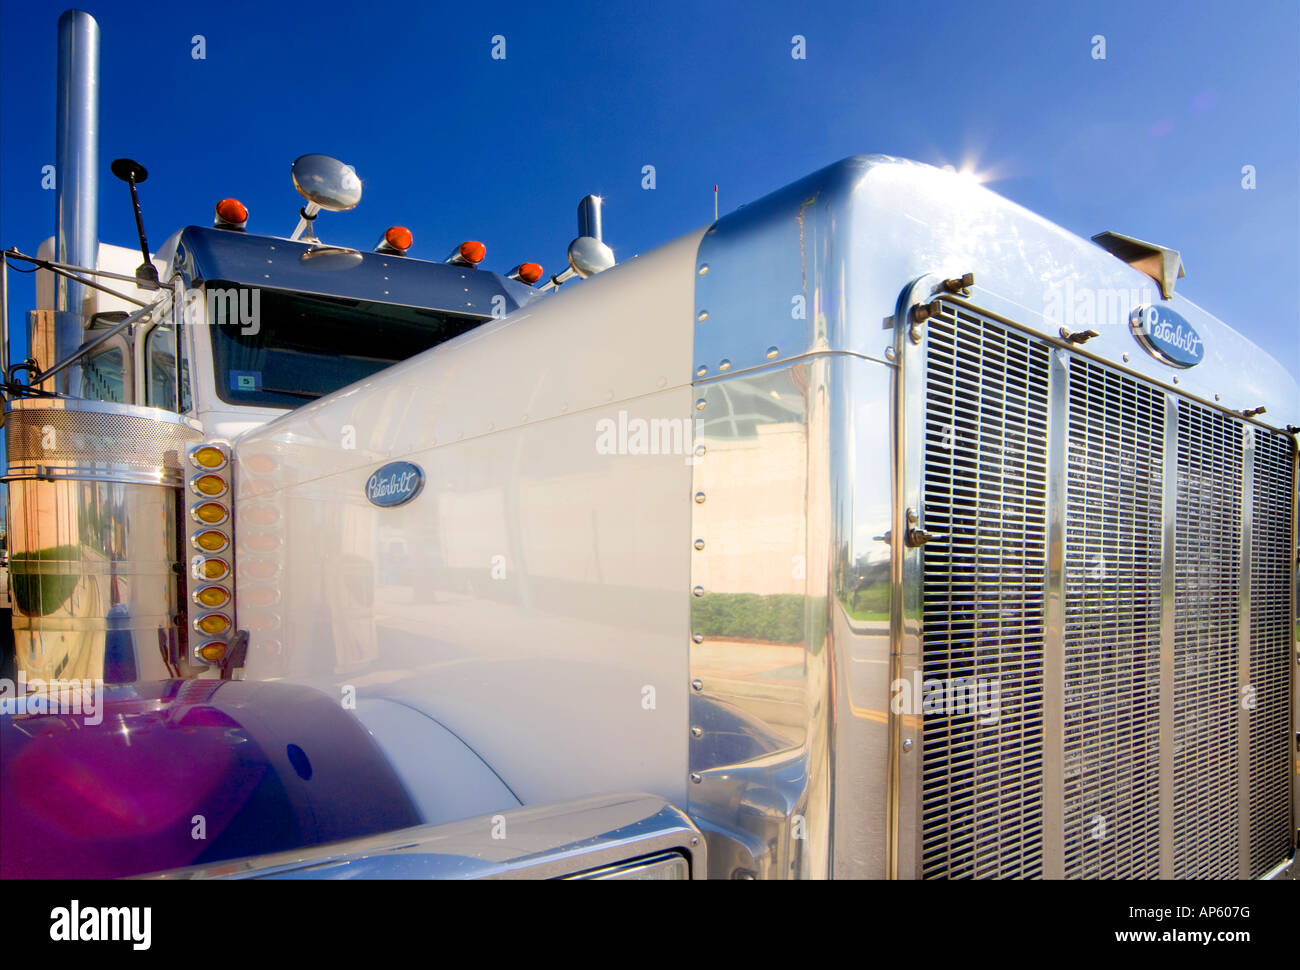 US Clean white American Peterbilt truck low wide angle close up against a blue sky. Florida. Stock Photo